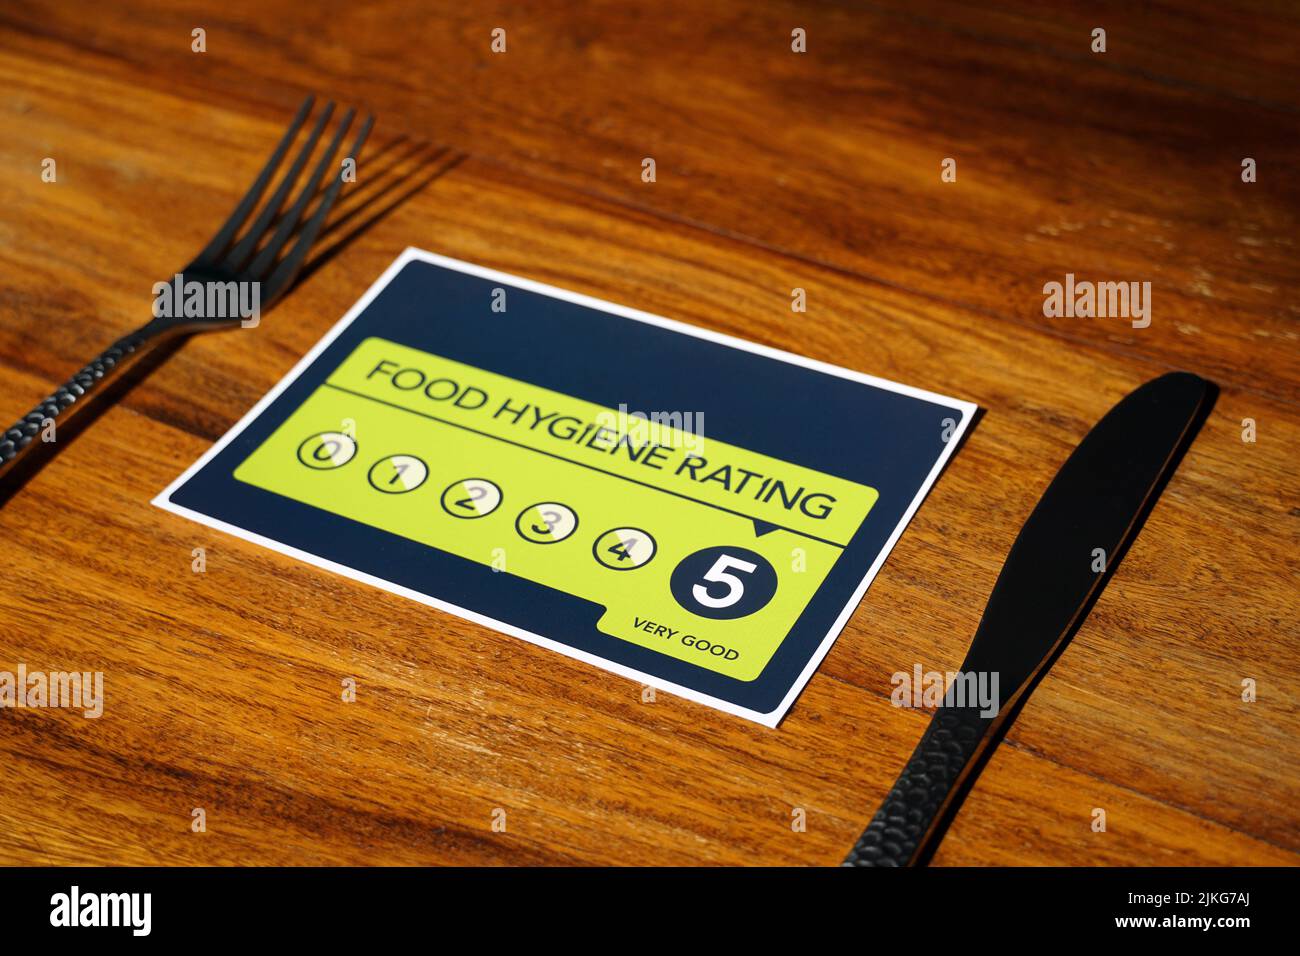 Food Hygiene Rating 5. Very Good Food Hygiene Rating from the United Kingdom Food Standards Agency on wooden background. Stock Photo